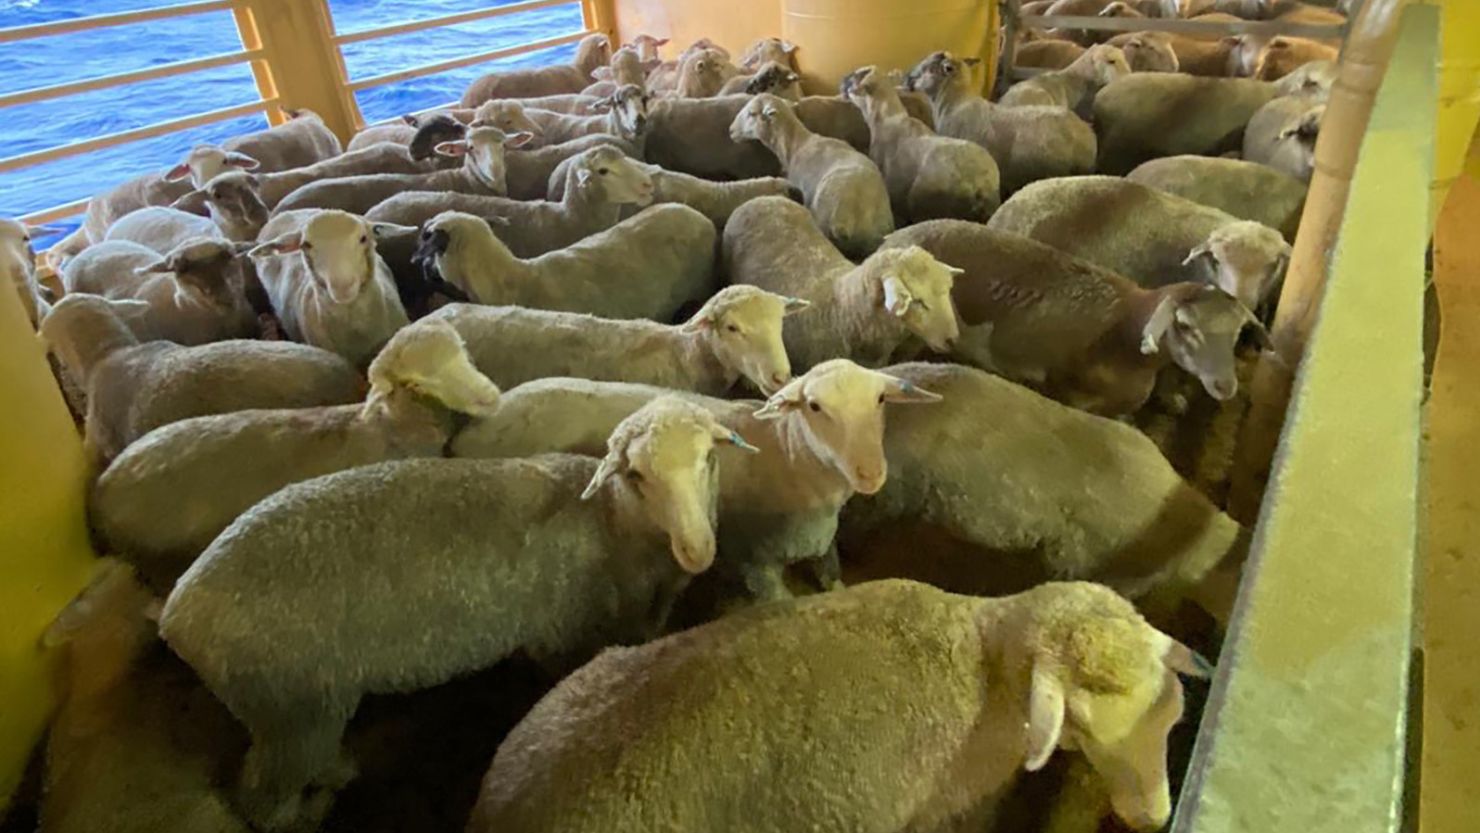 An image of sheep aboard the MV Bahijah taken said to have been taken a few days ago after the ship's arrival back in Australia.